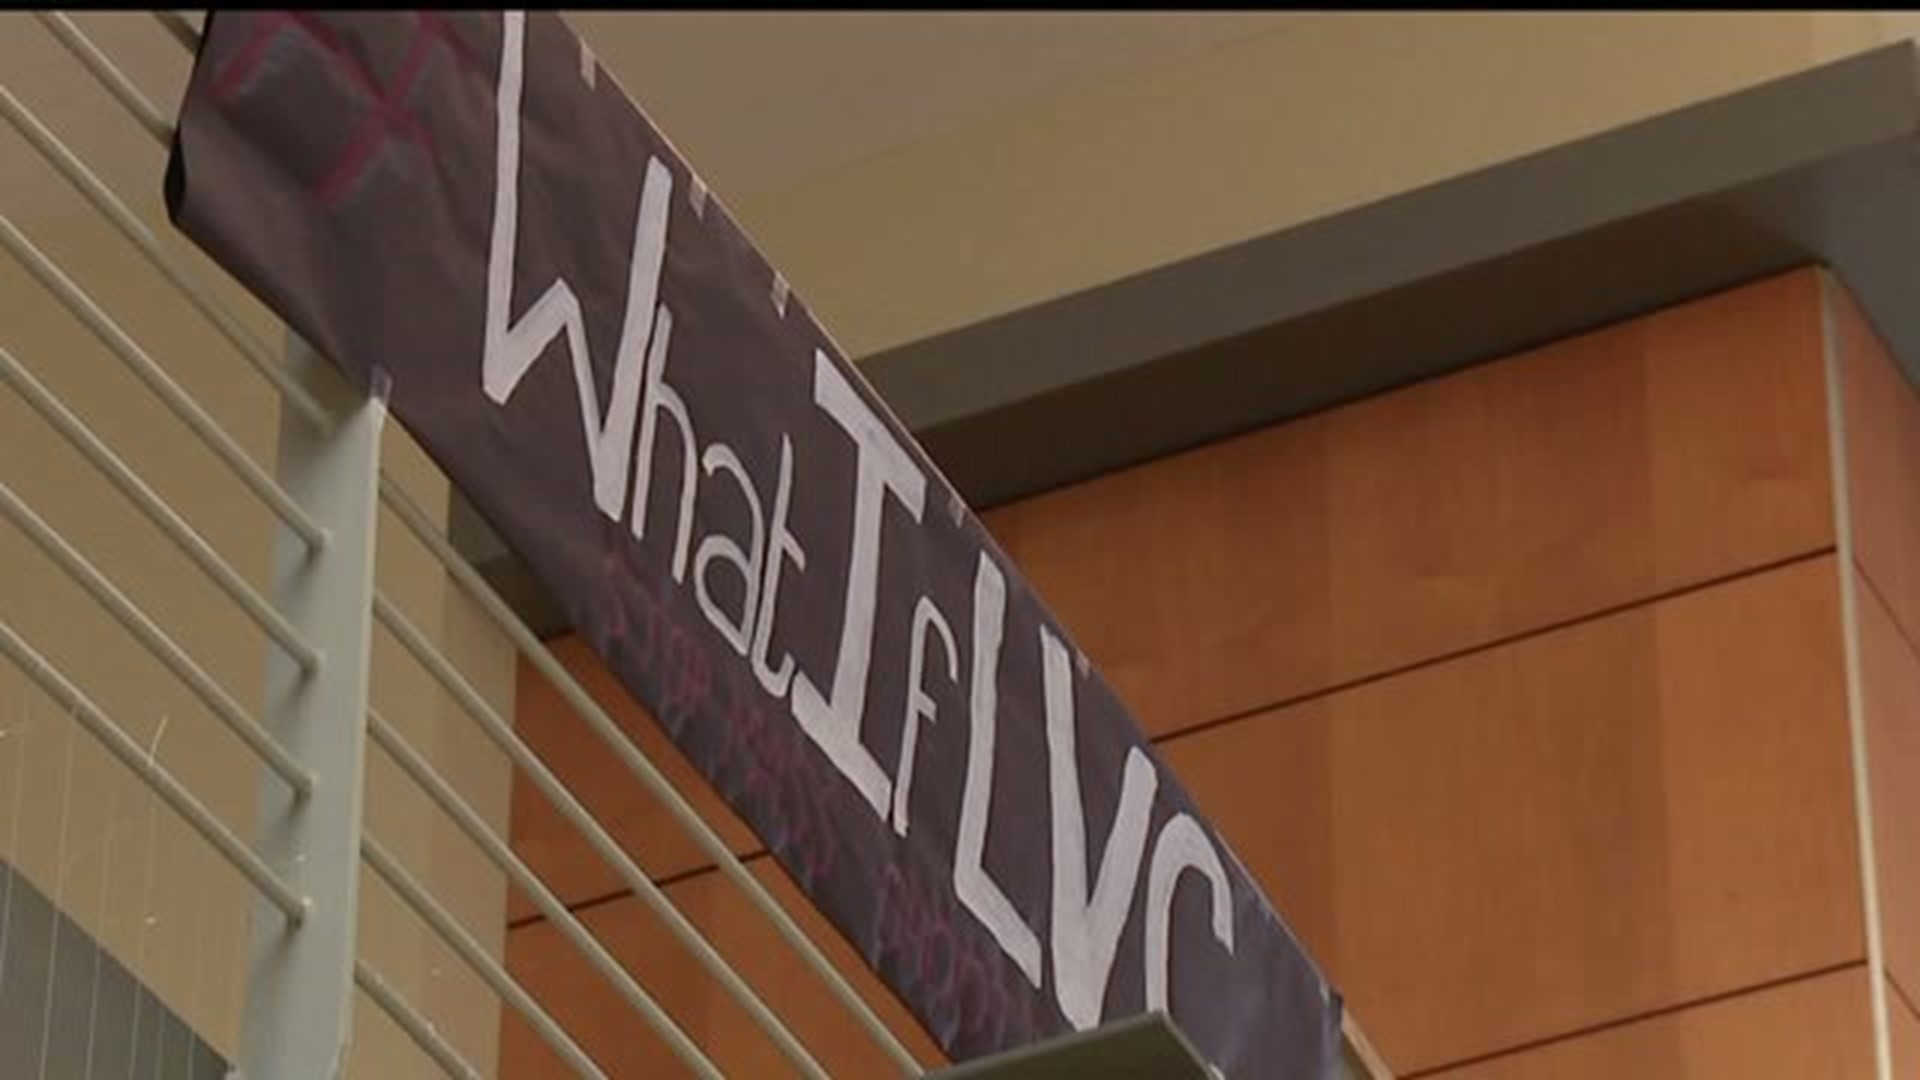 Students at Lebanon Valley College voice concerns